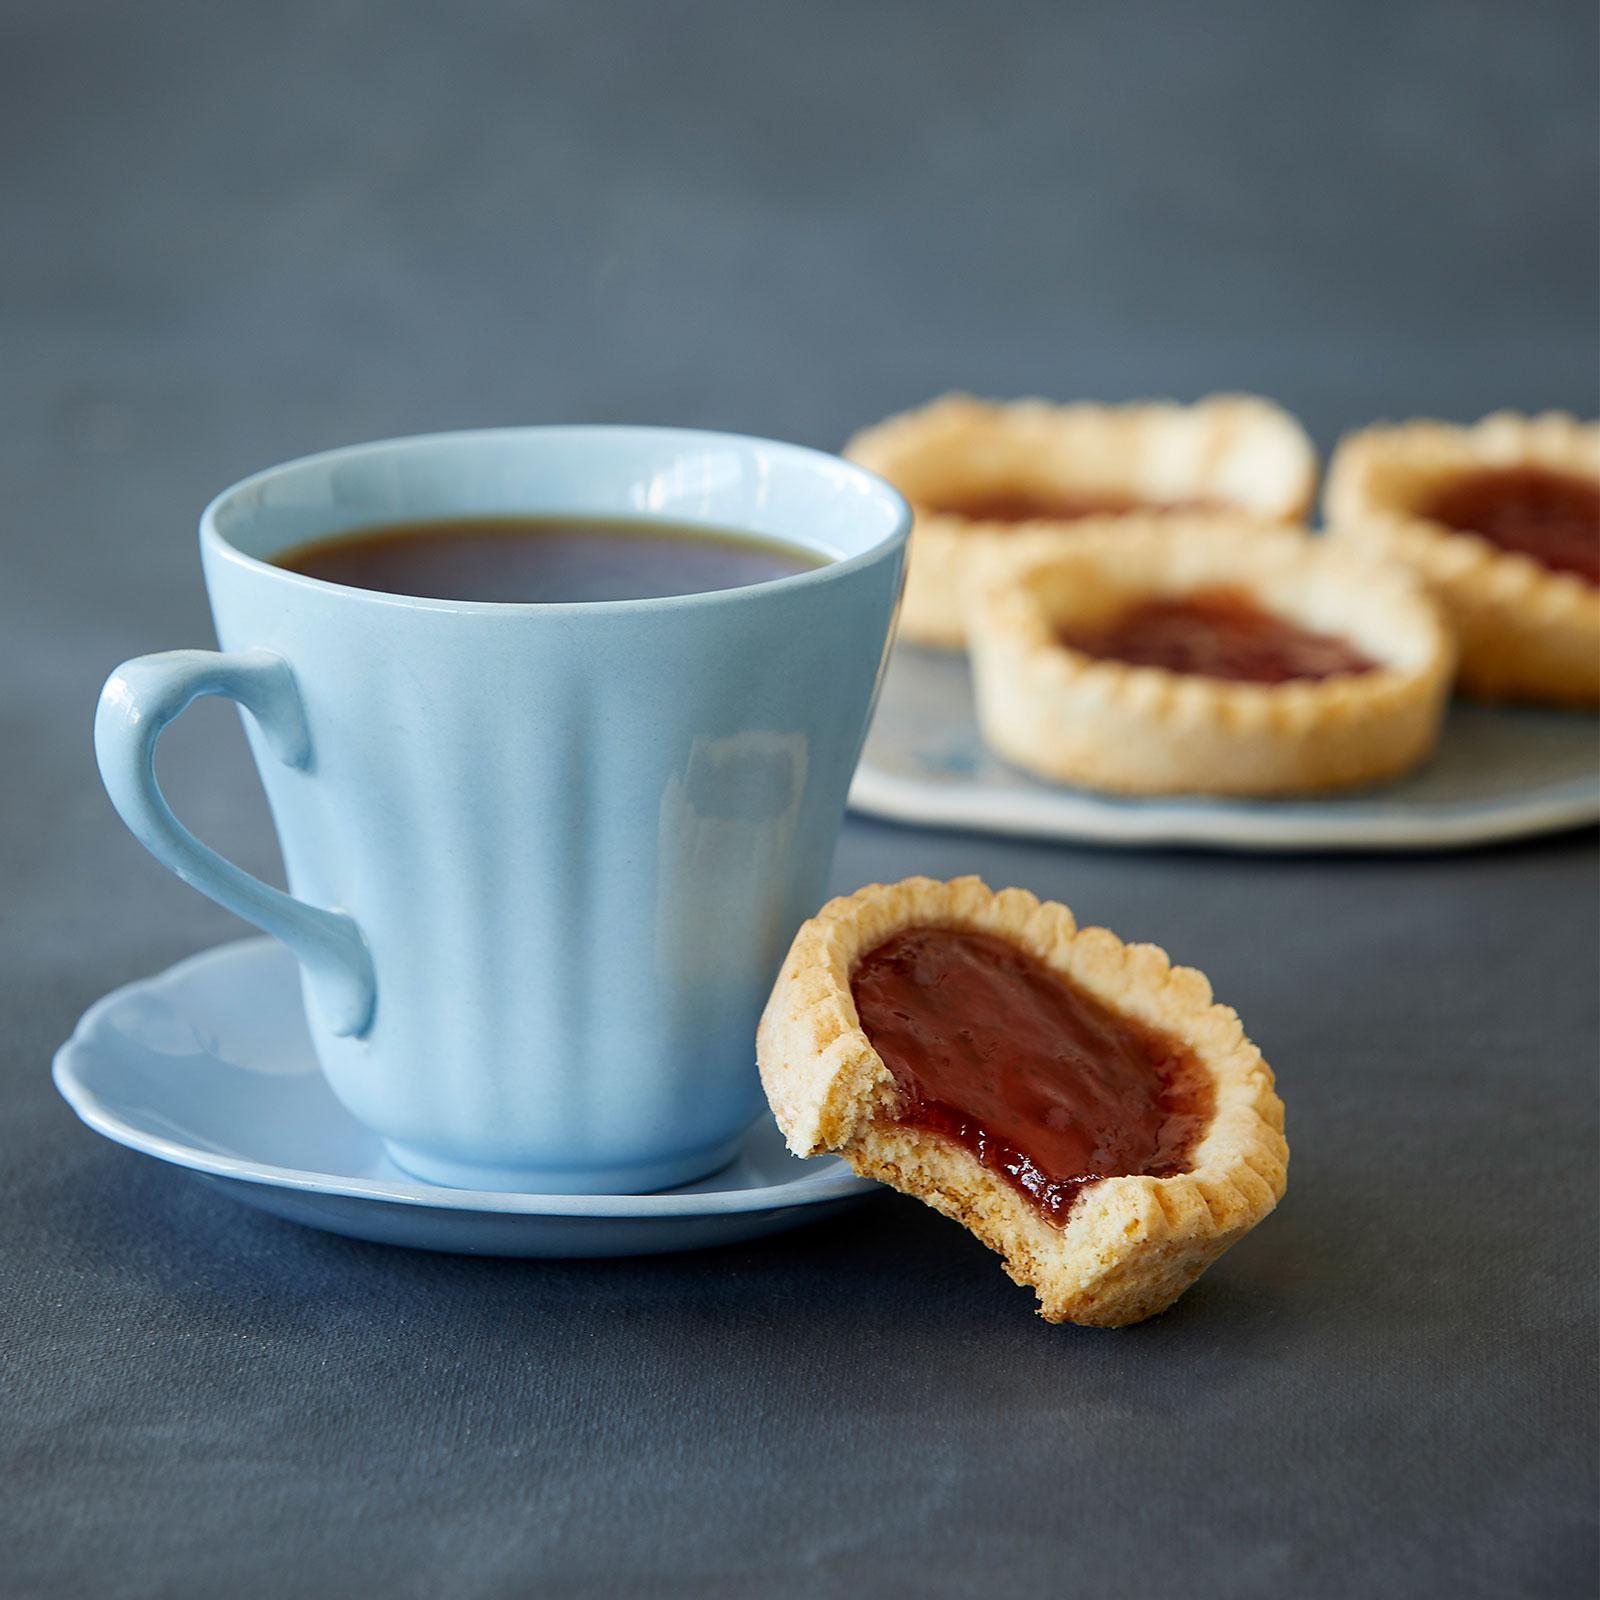 A cup of coffee with a gluten-free jam tart resting on a saucer. At the back a plate contains three more jam tarts.